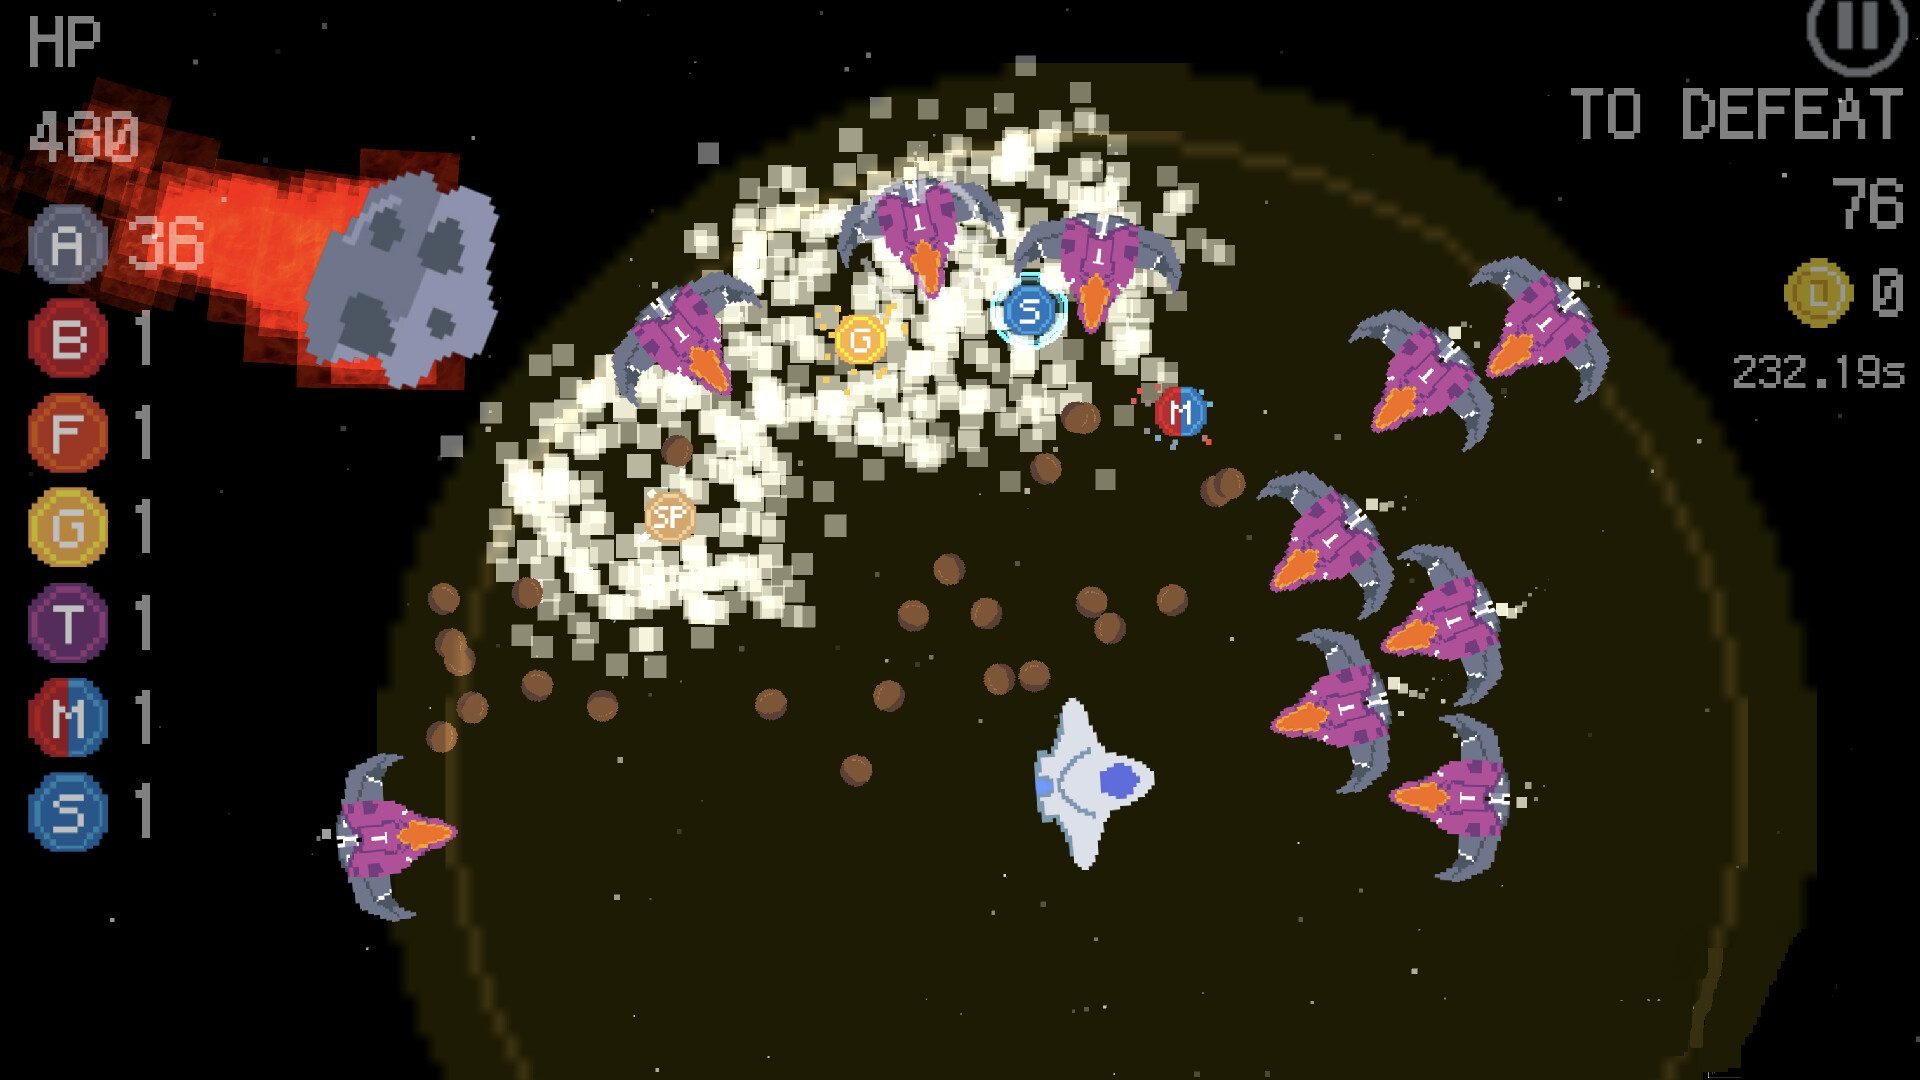 Make An Arcade Space Shooter With GameMaker